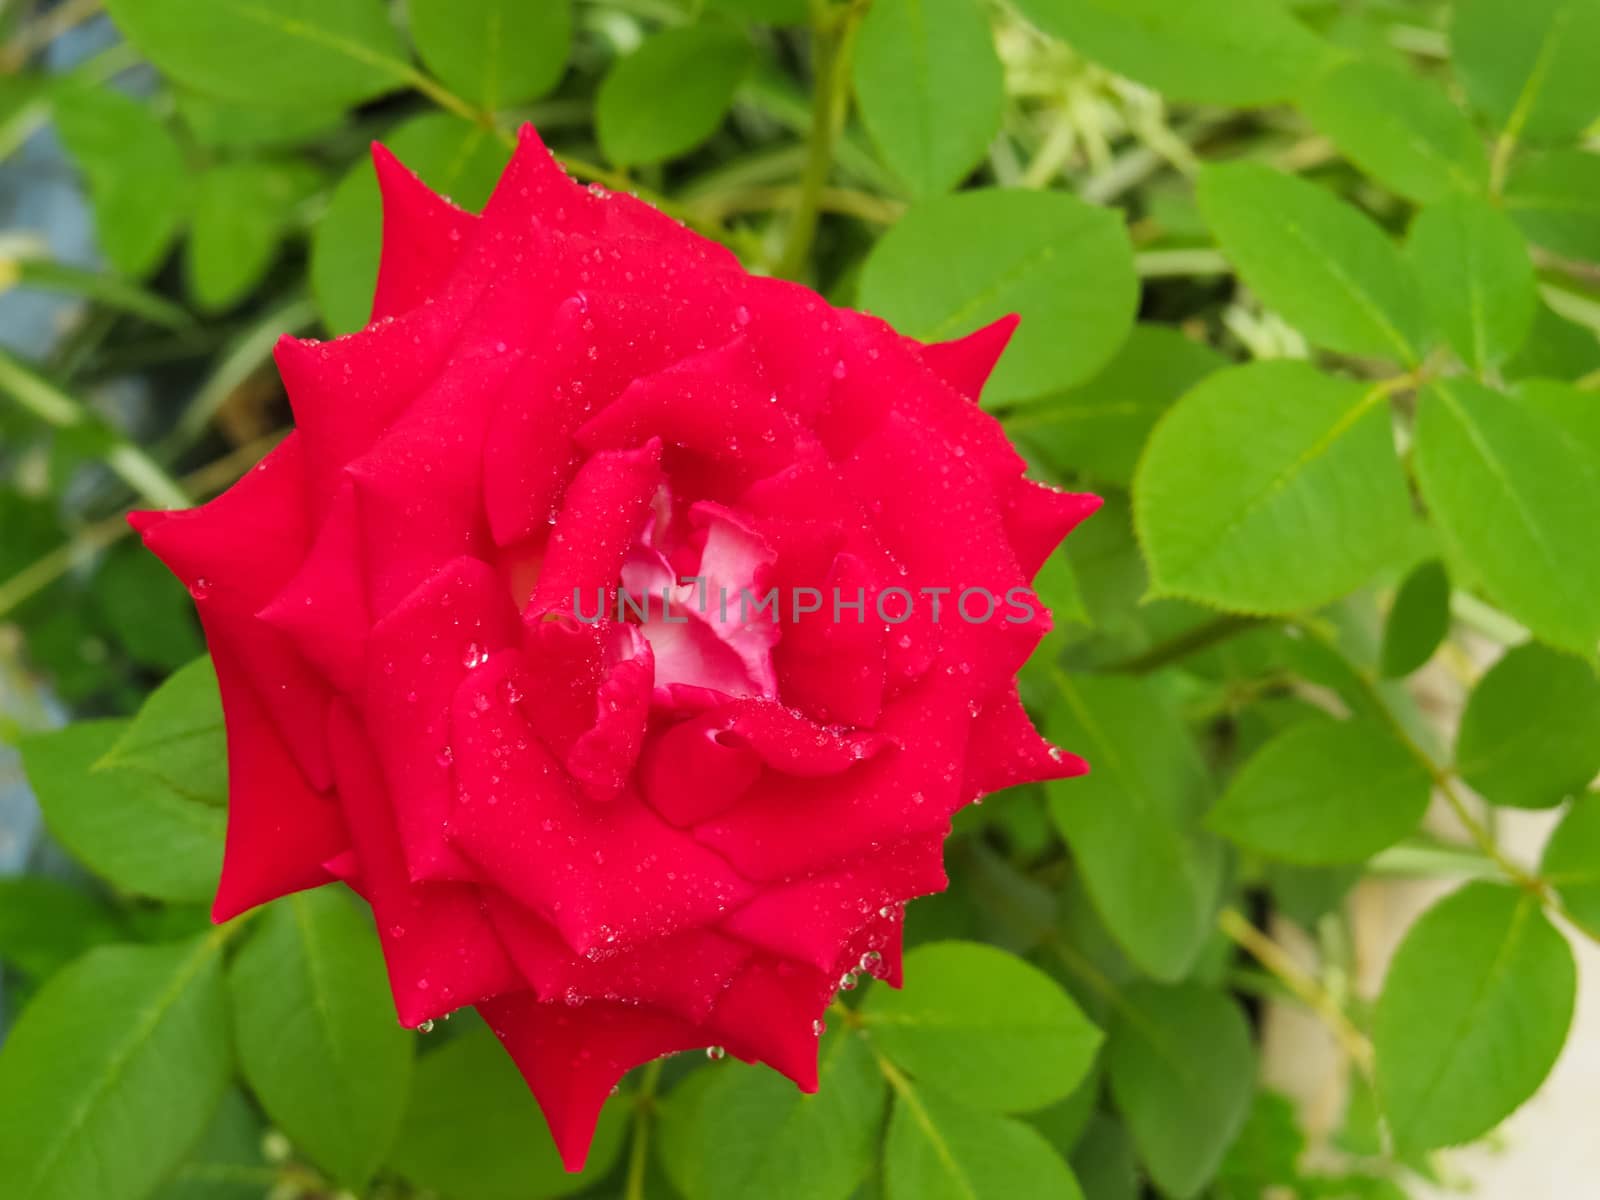 Rose flower in red color with water droplets. by silviopl